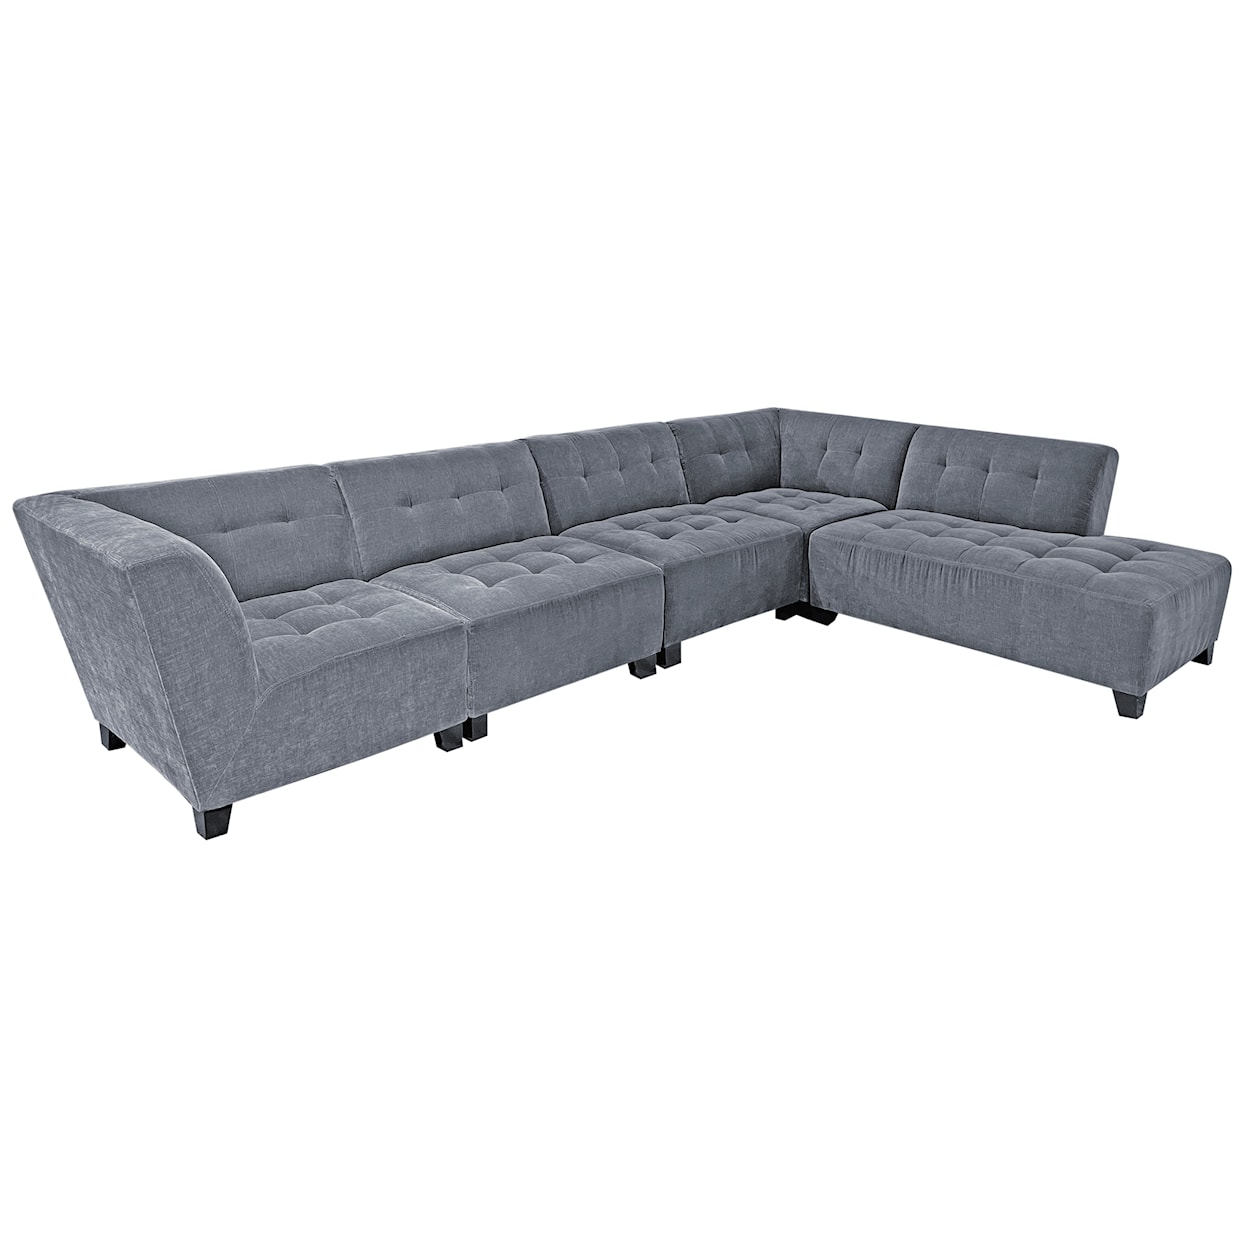 Jonathan Louis Belaire Belaire Sectional